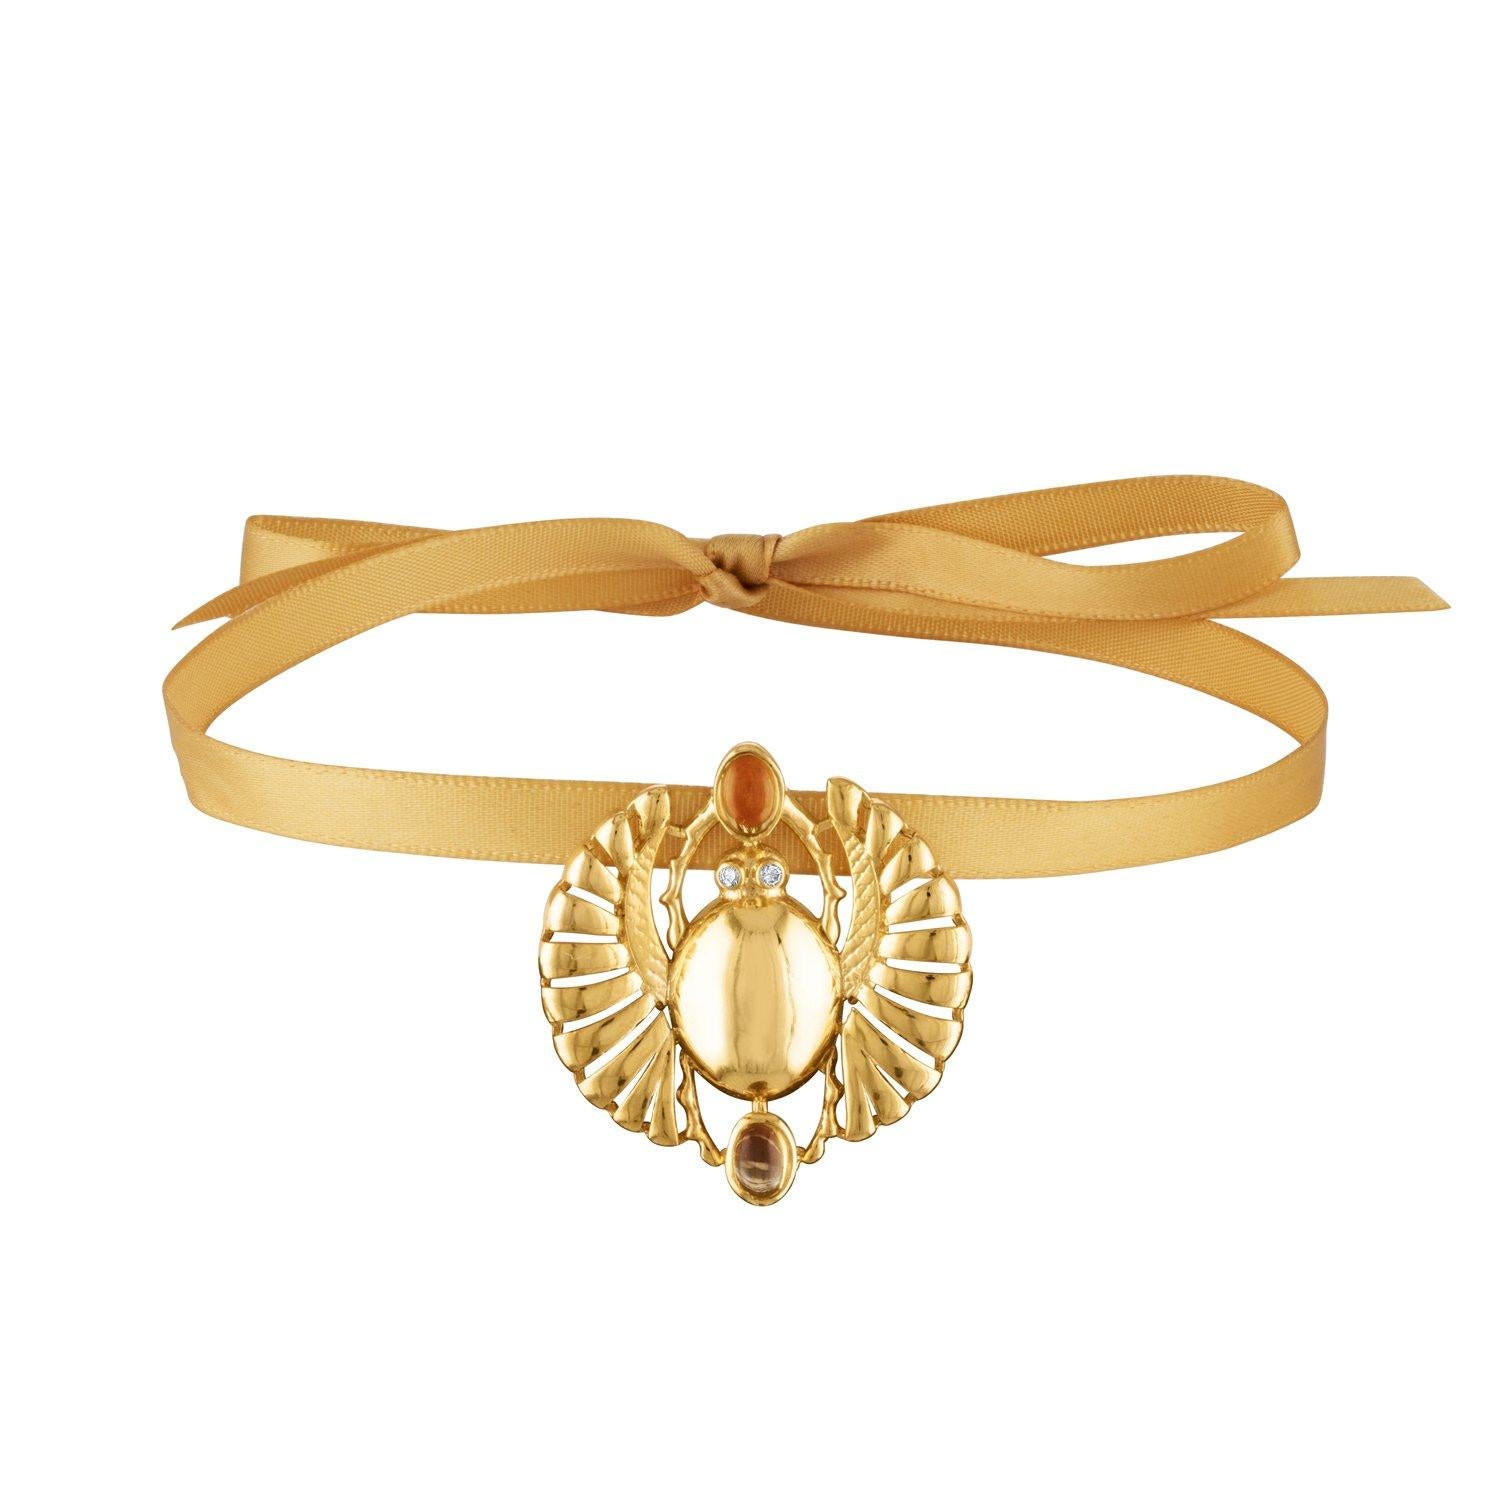 Nefertiti Winged Scarab Pendant Choker Necklace with Citrine in 18k Gold Vermeil For Sale